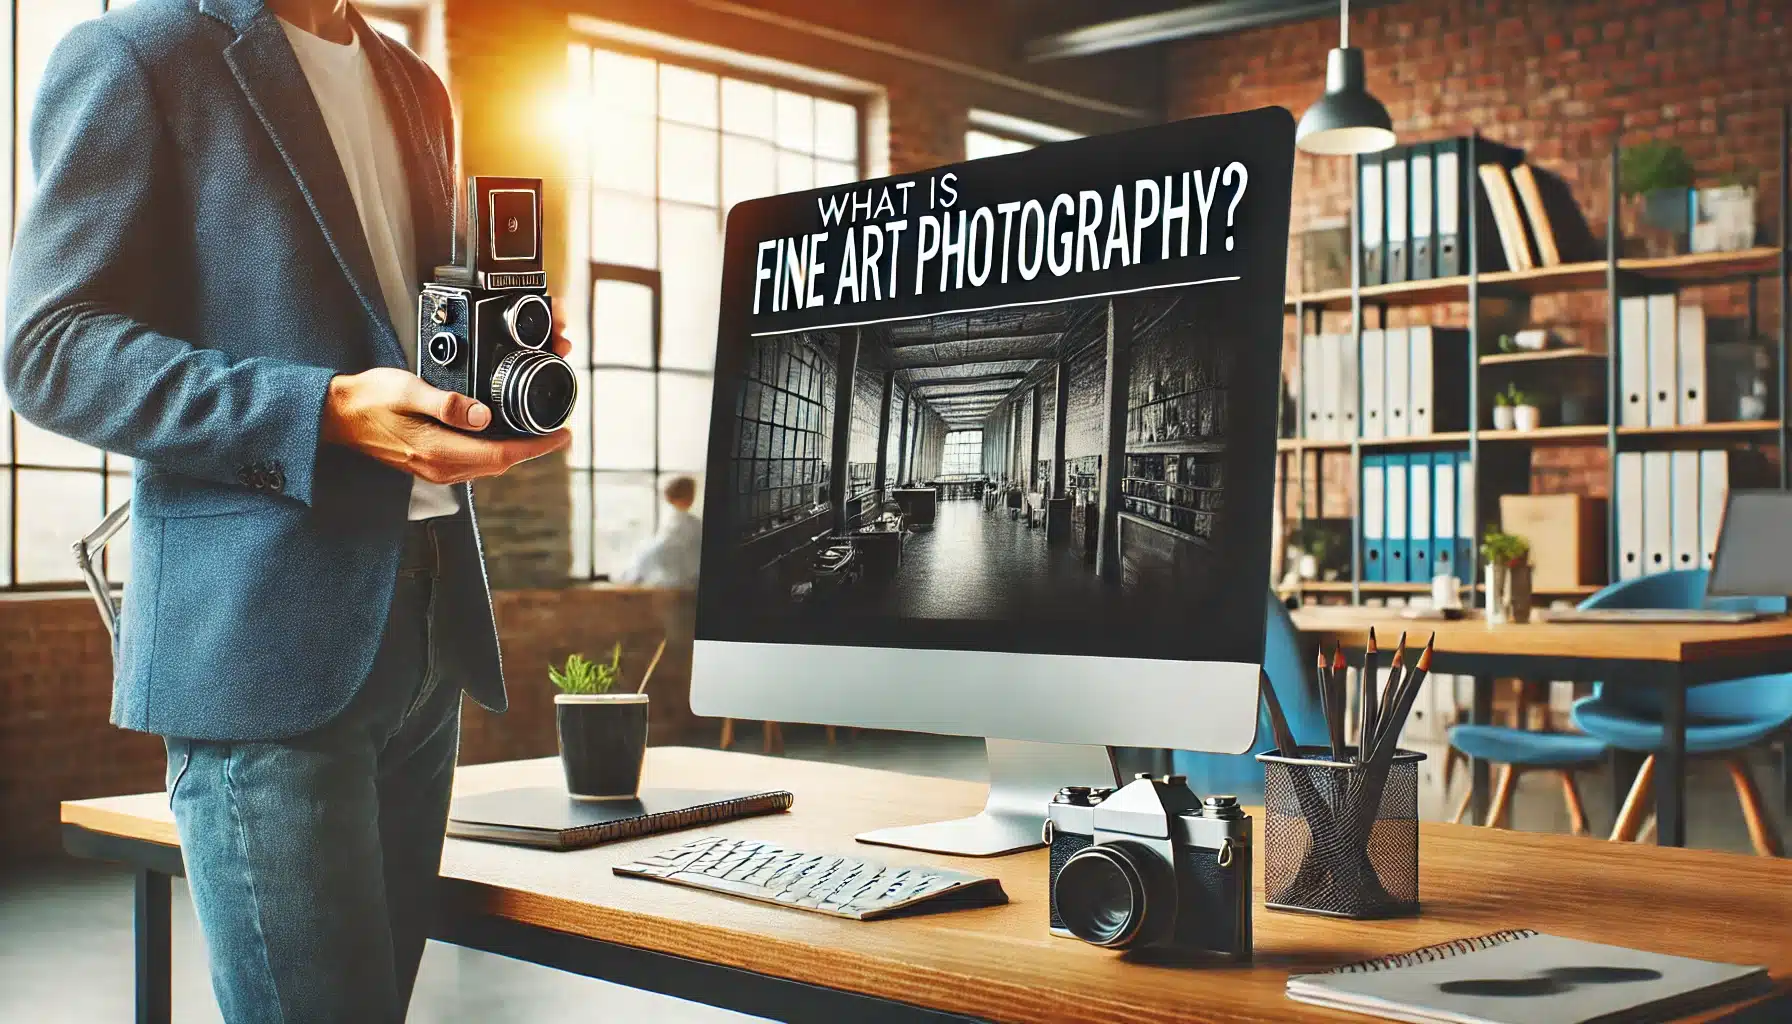 A person standing next to a desk, looking at a desktop computer screen displaying the text "What is Fine Art Photography?" while holding a camera in their hand. The office background includes shelves, office supplies, and a window with natural light.